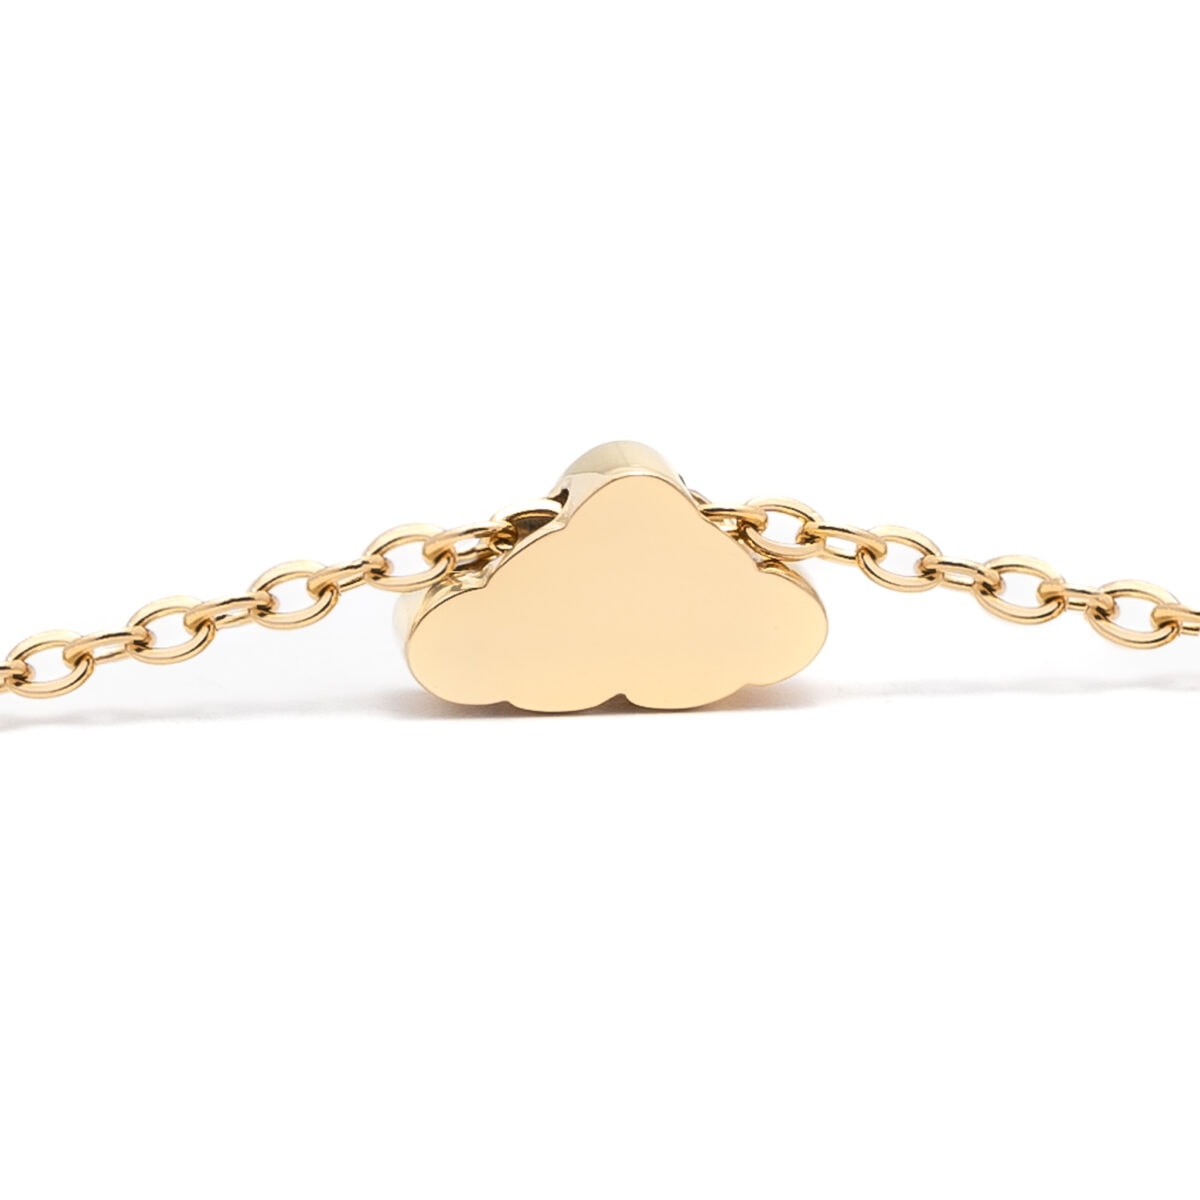 https://m.clubbella.co/product/volare-cloud-gold-charm-bracelet/ Volare Cloud Gold Charm (3)